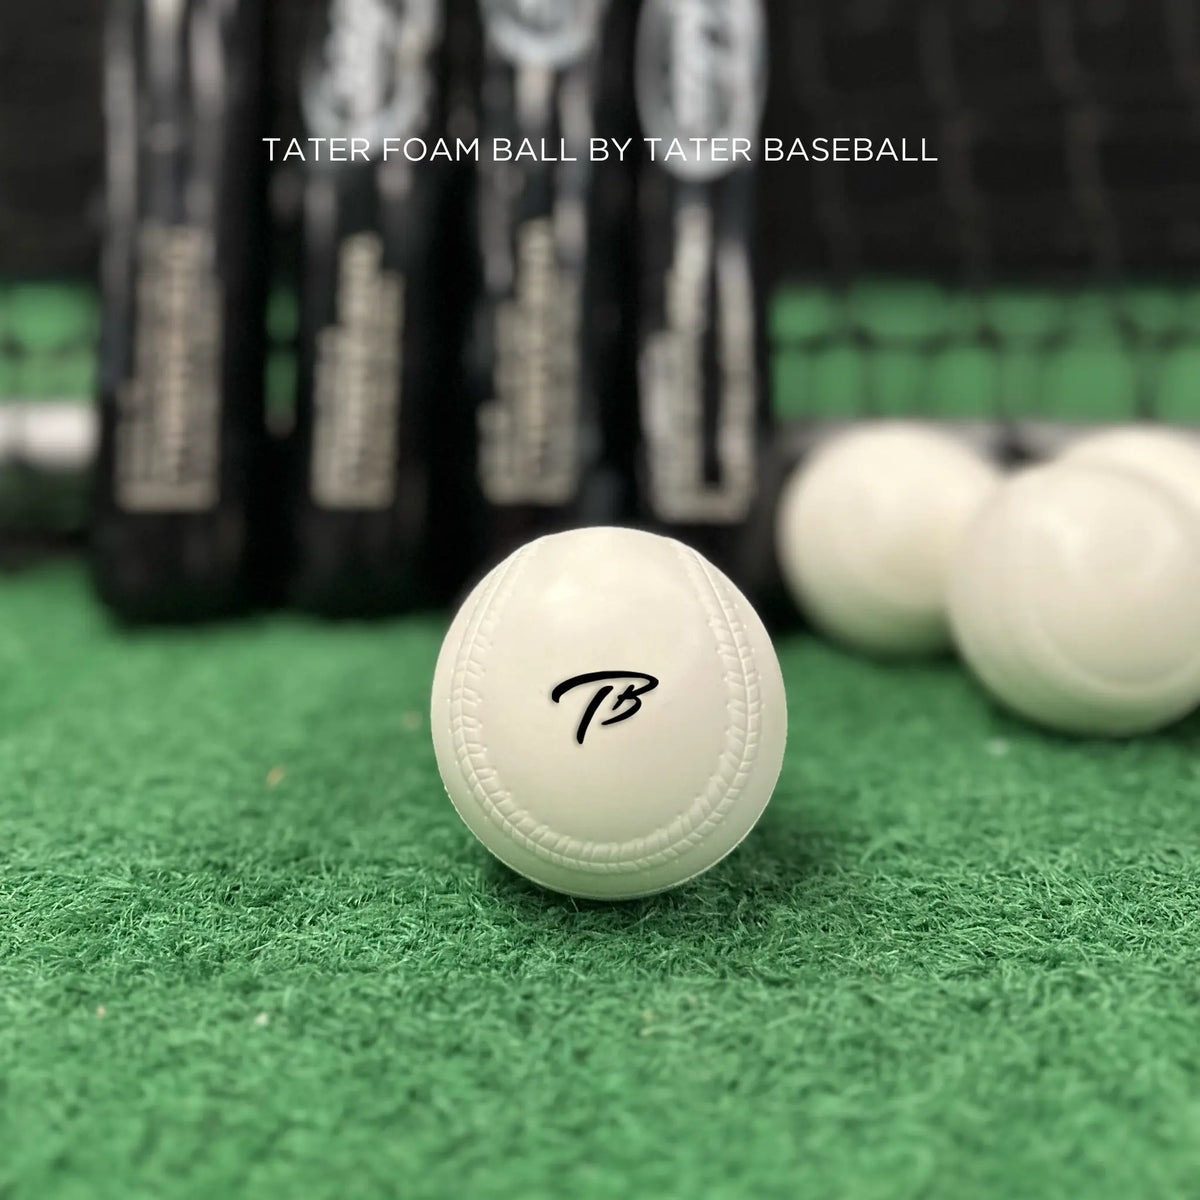 White foam baseball with TB resting on turf with training bats in the background